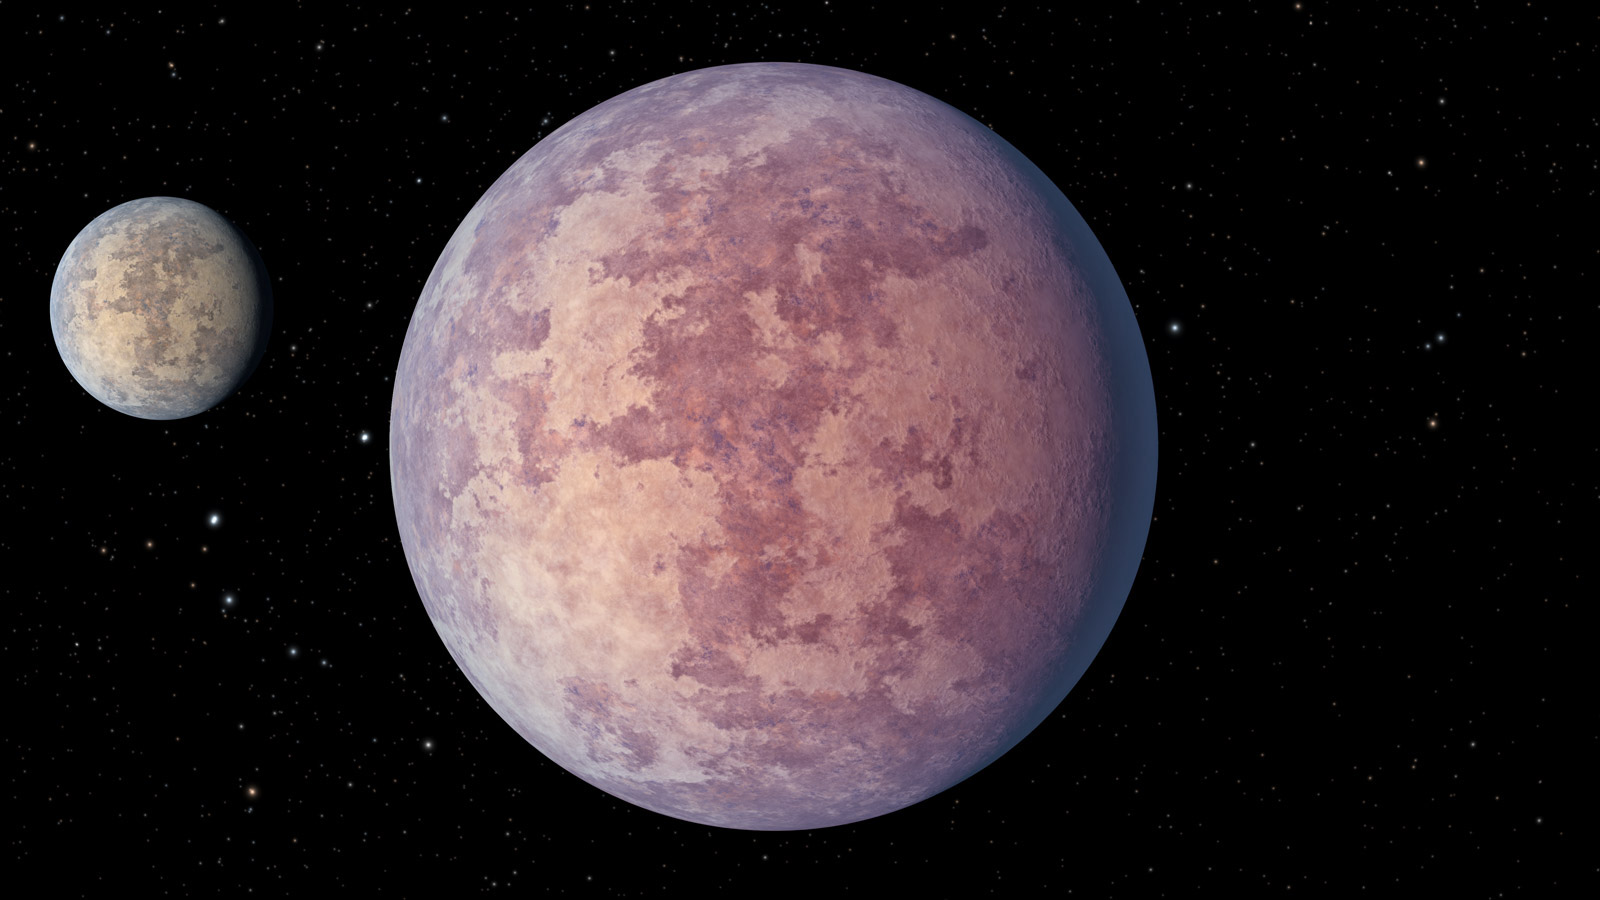 slide 3 - Discovery Alert: Two New, Rocky Planets in the Solar Neighborhood